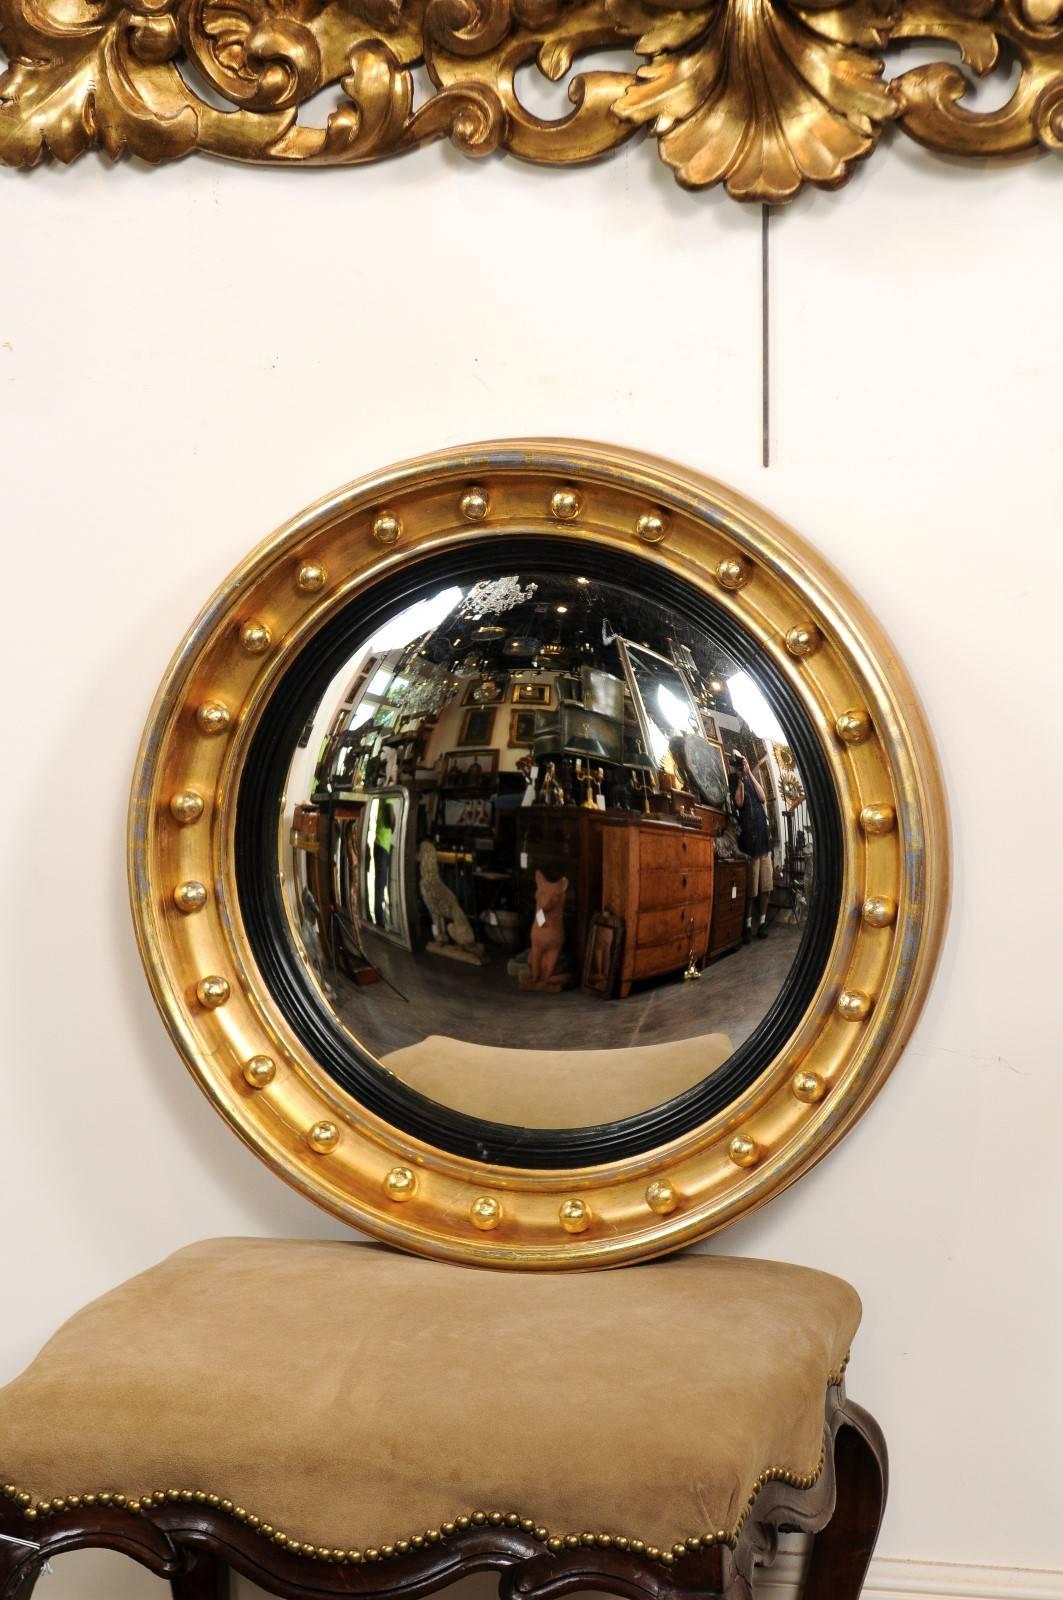 This English girandole mirror from the mid-19th century features a circular convex mirror surrounded by an ebonized wood molding. The outer frame is made of giltwood and adorned with small spheres, rhythmically placed on the surround. Elegant in